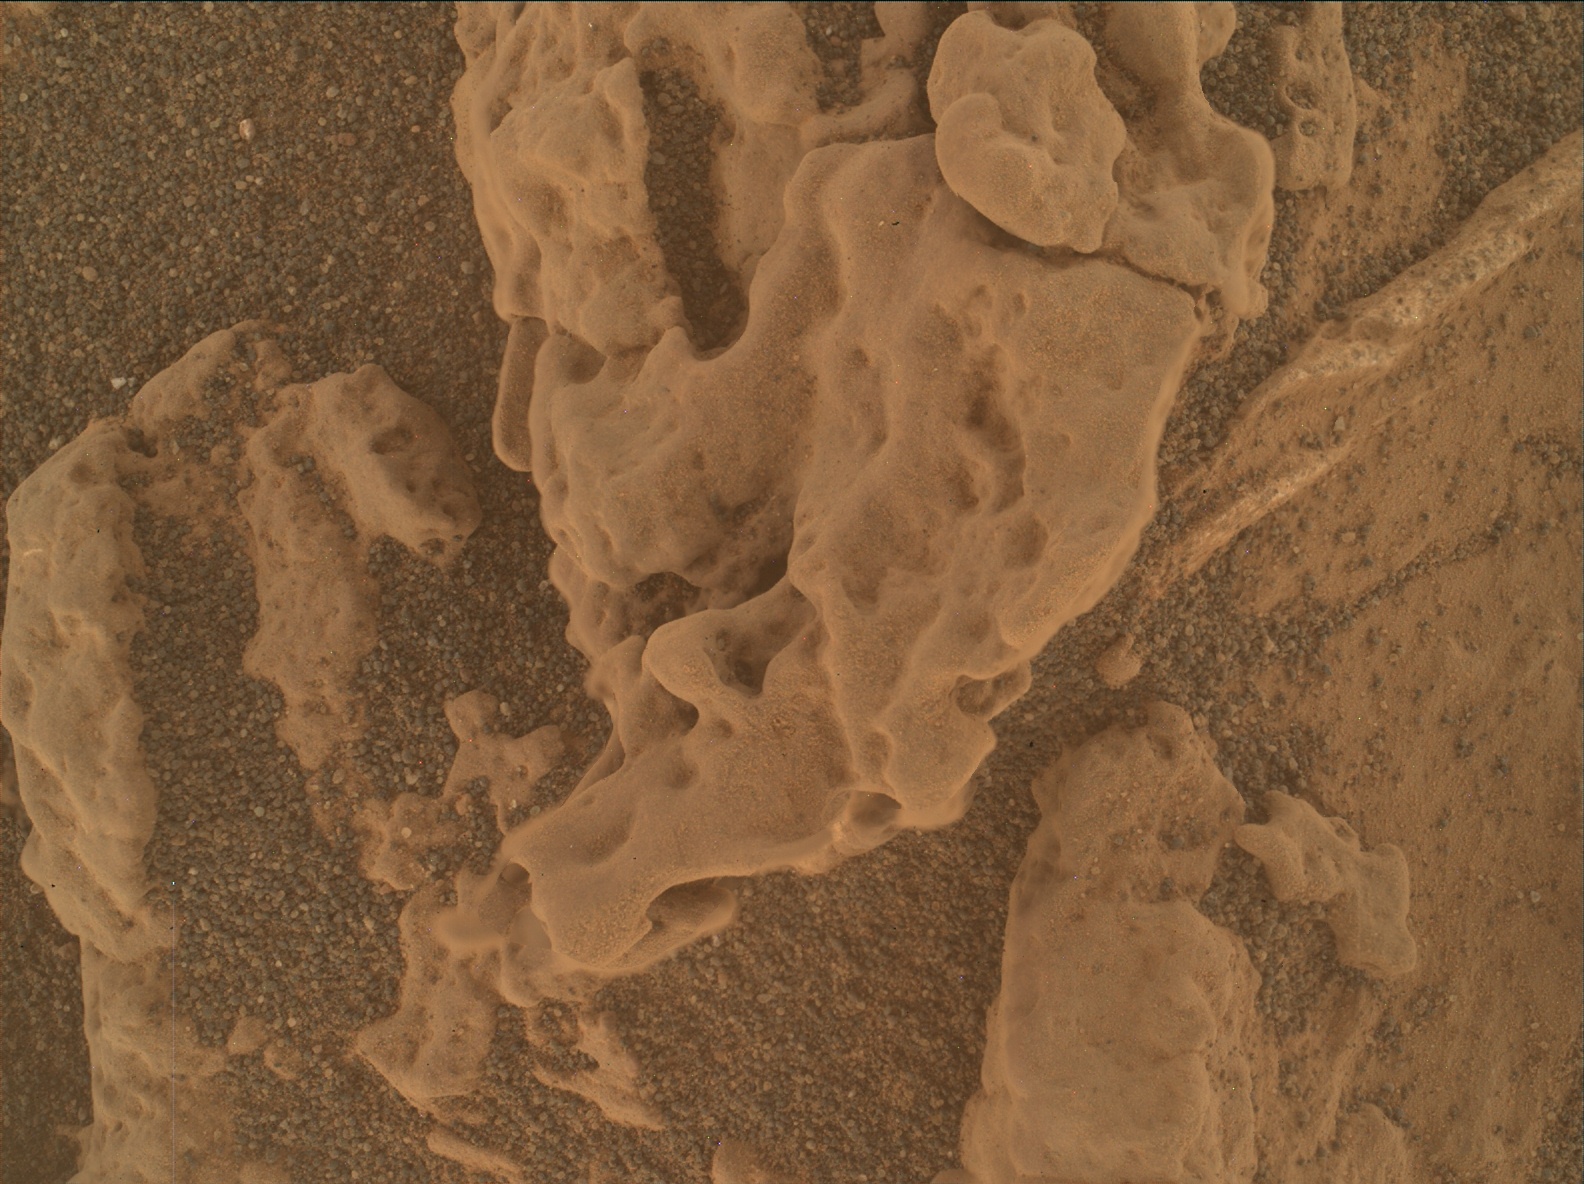 Nasa's Mars rover Curiosity acquired this image using its Mars Hand Lens Imager (MAHLI) on Sol 3185